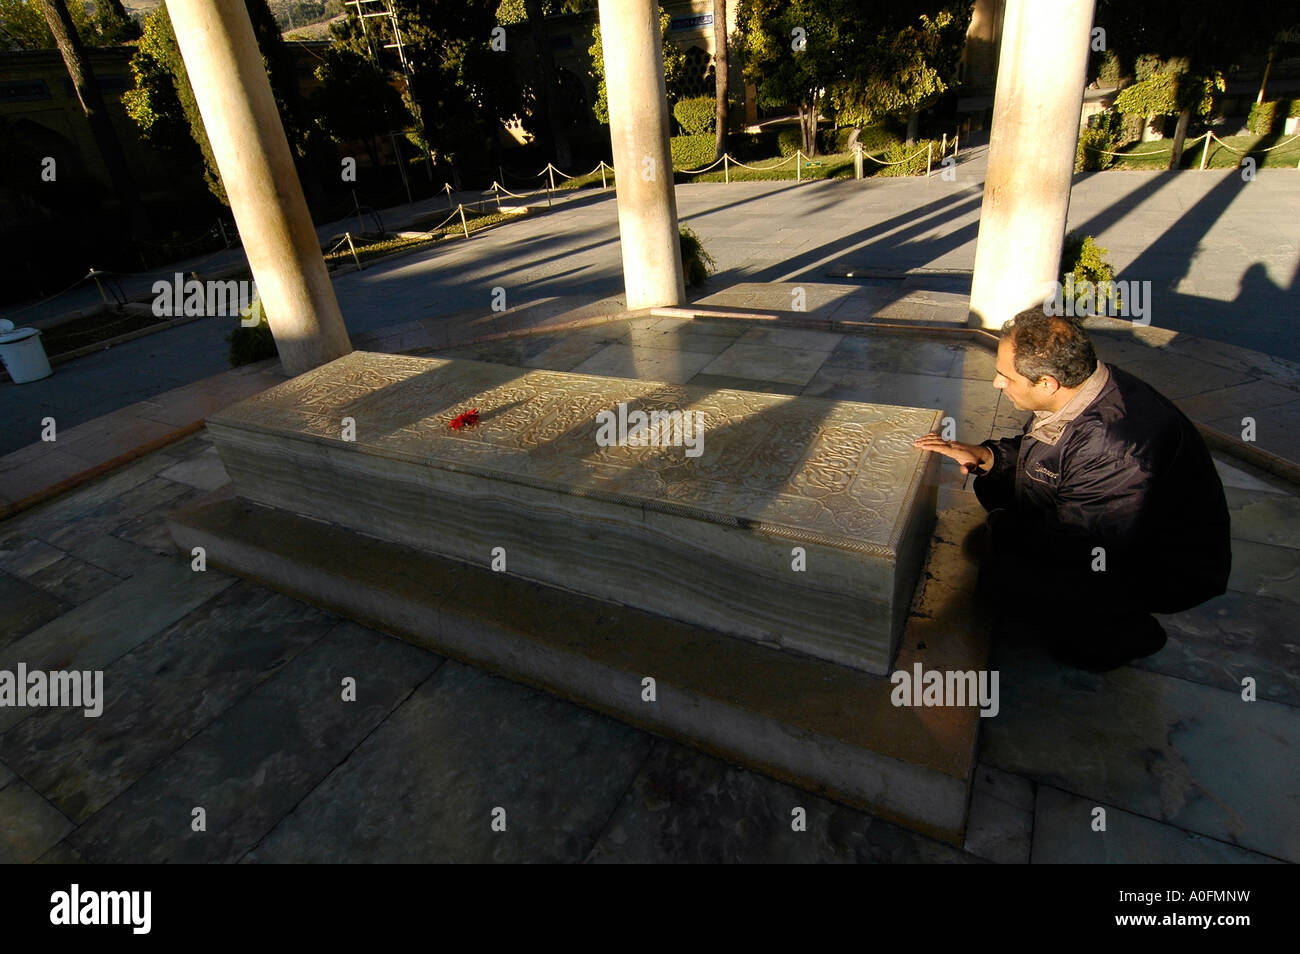 An Iranian man praying near the tomb of Hafez, a famous Persian poet who is revered by most Iranians, Shiraz, Iran Stock Photo